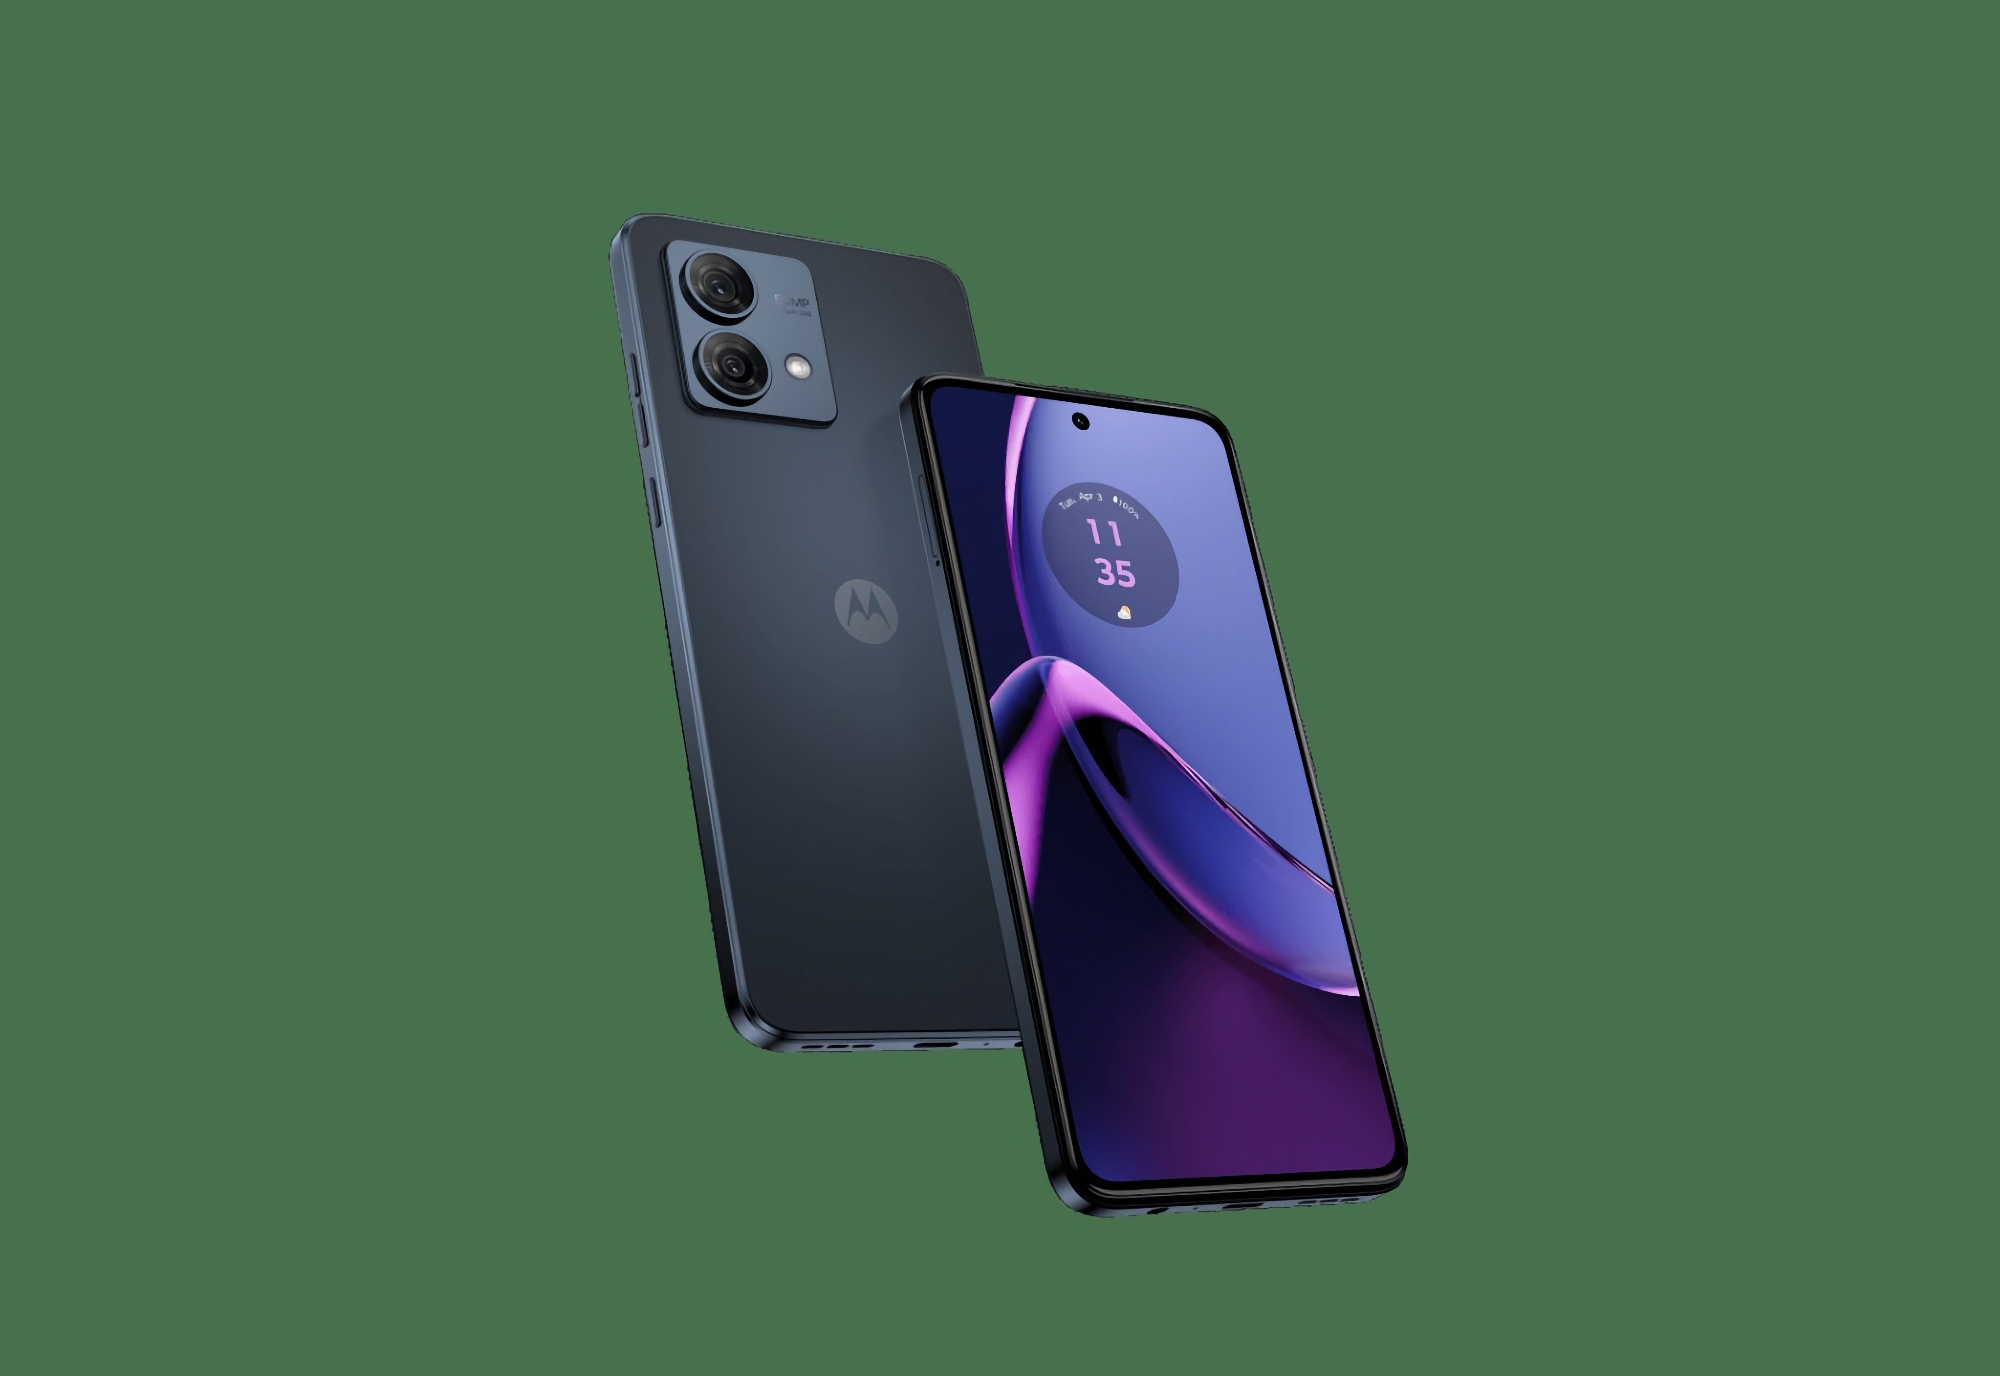 Insider reveals Moto G84 5G price: smartphone with 120Hz POLED screen, Snapdragon 695 chip and IP54 protection